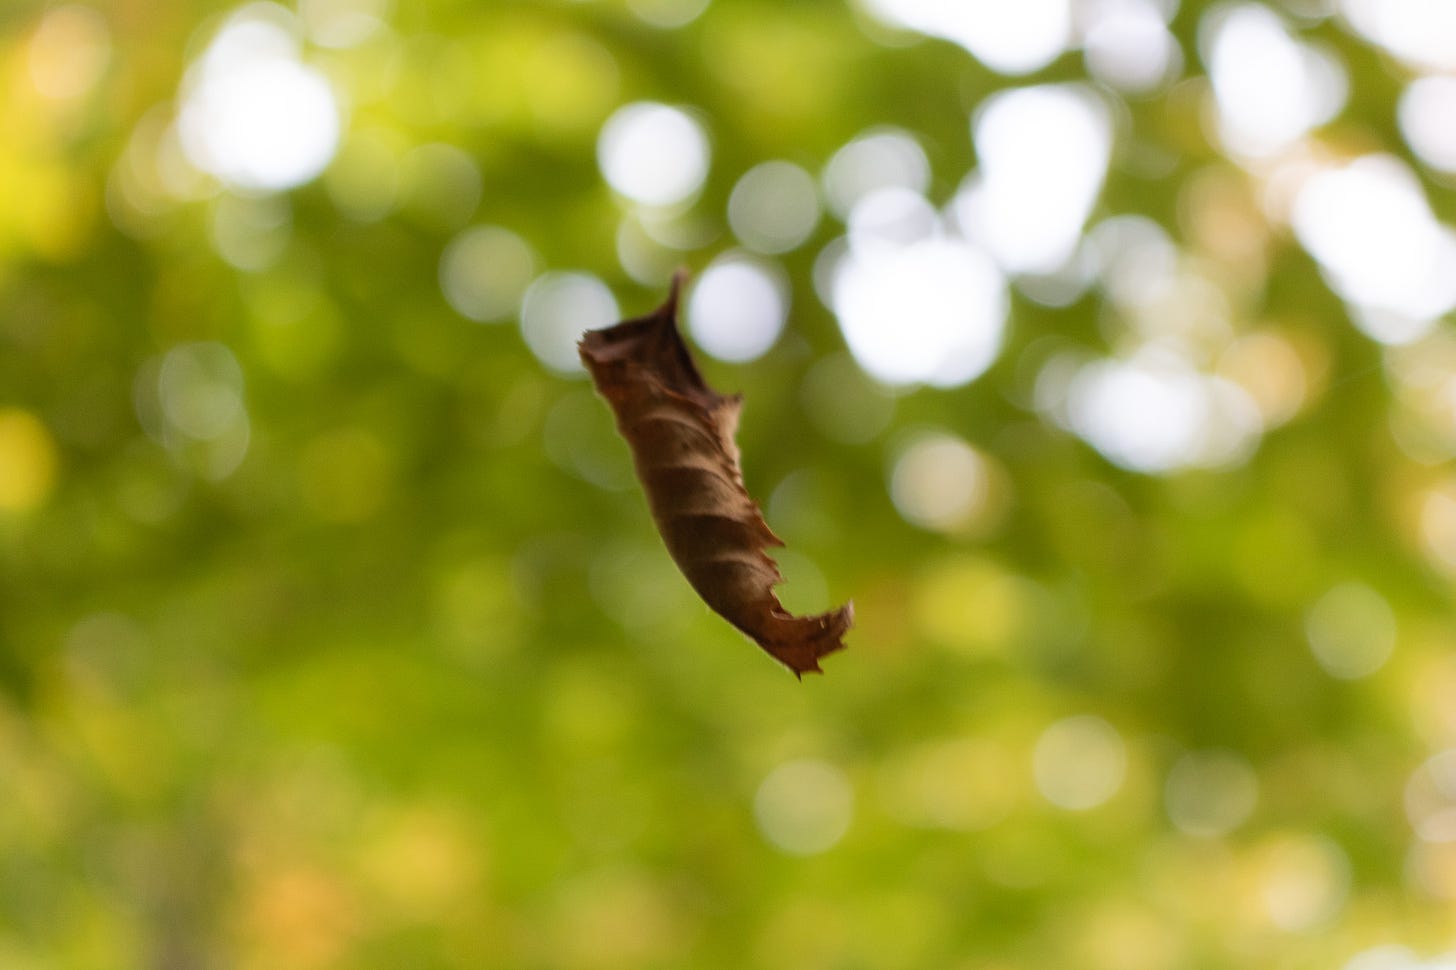 A leaf suspended in the air, a snapshot of the present moment